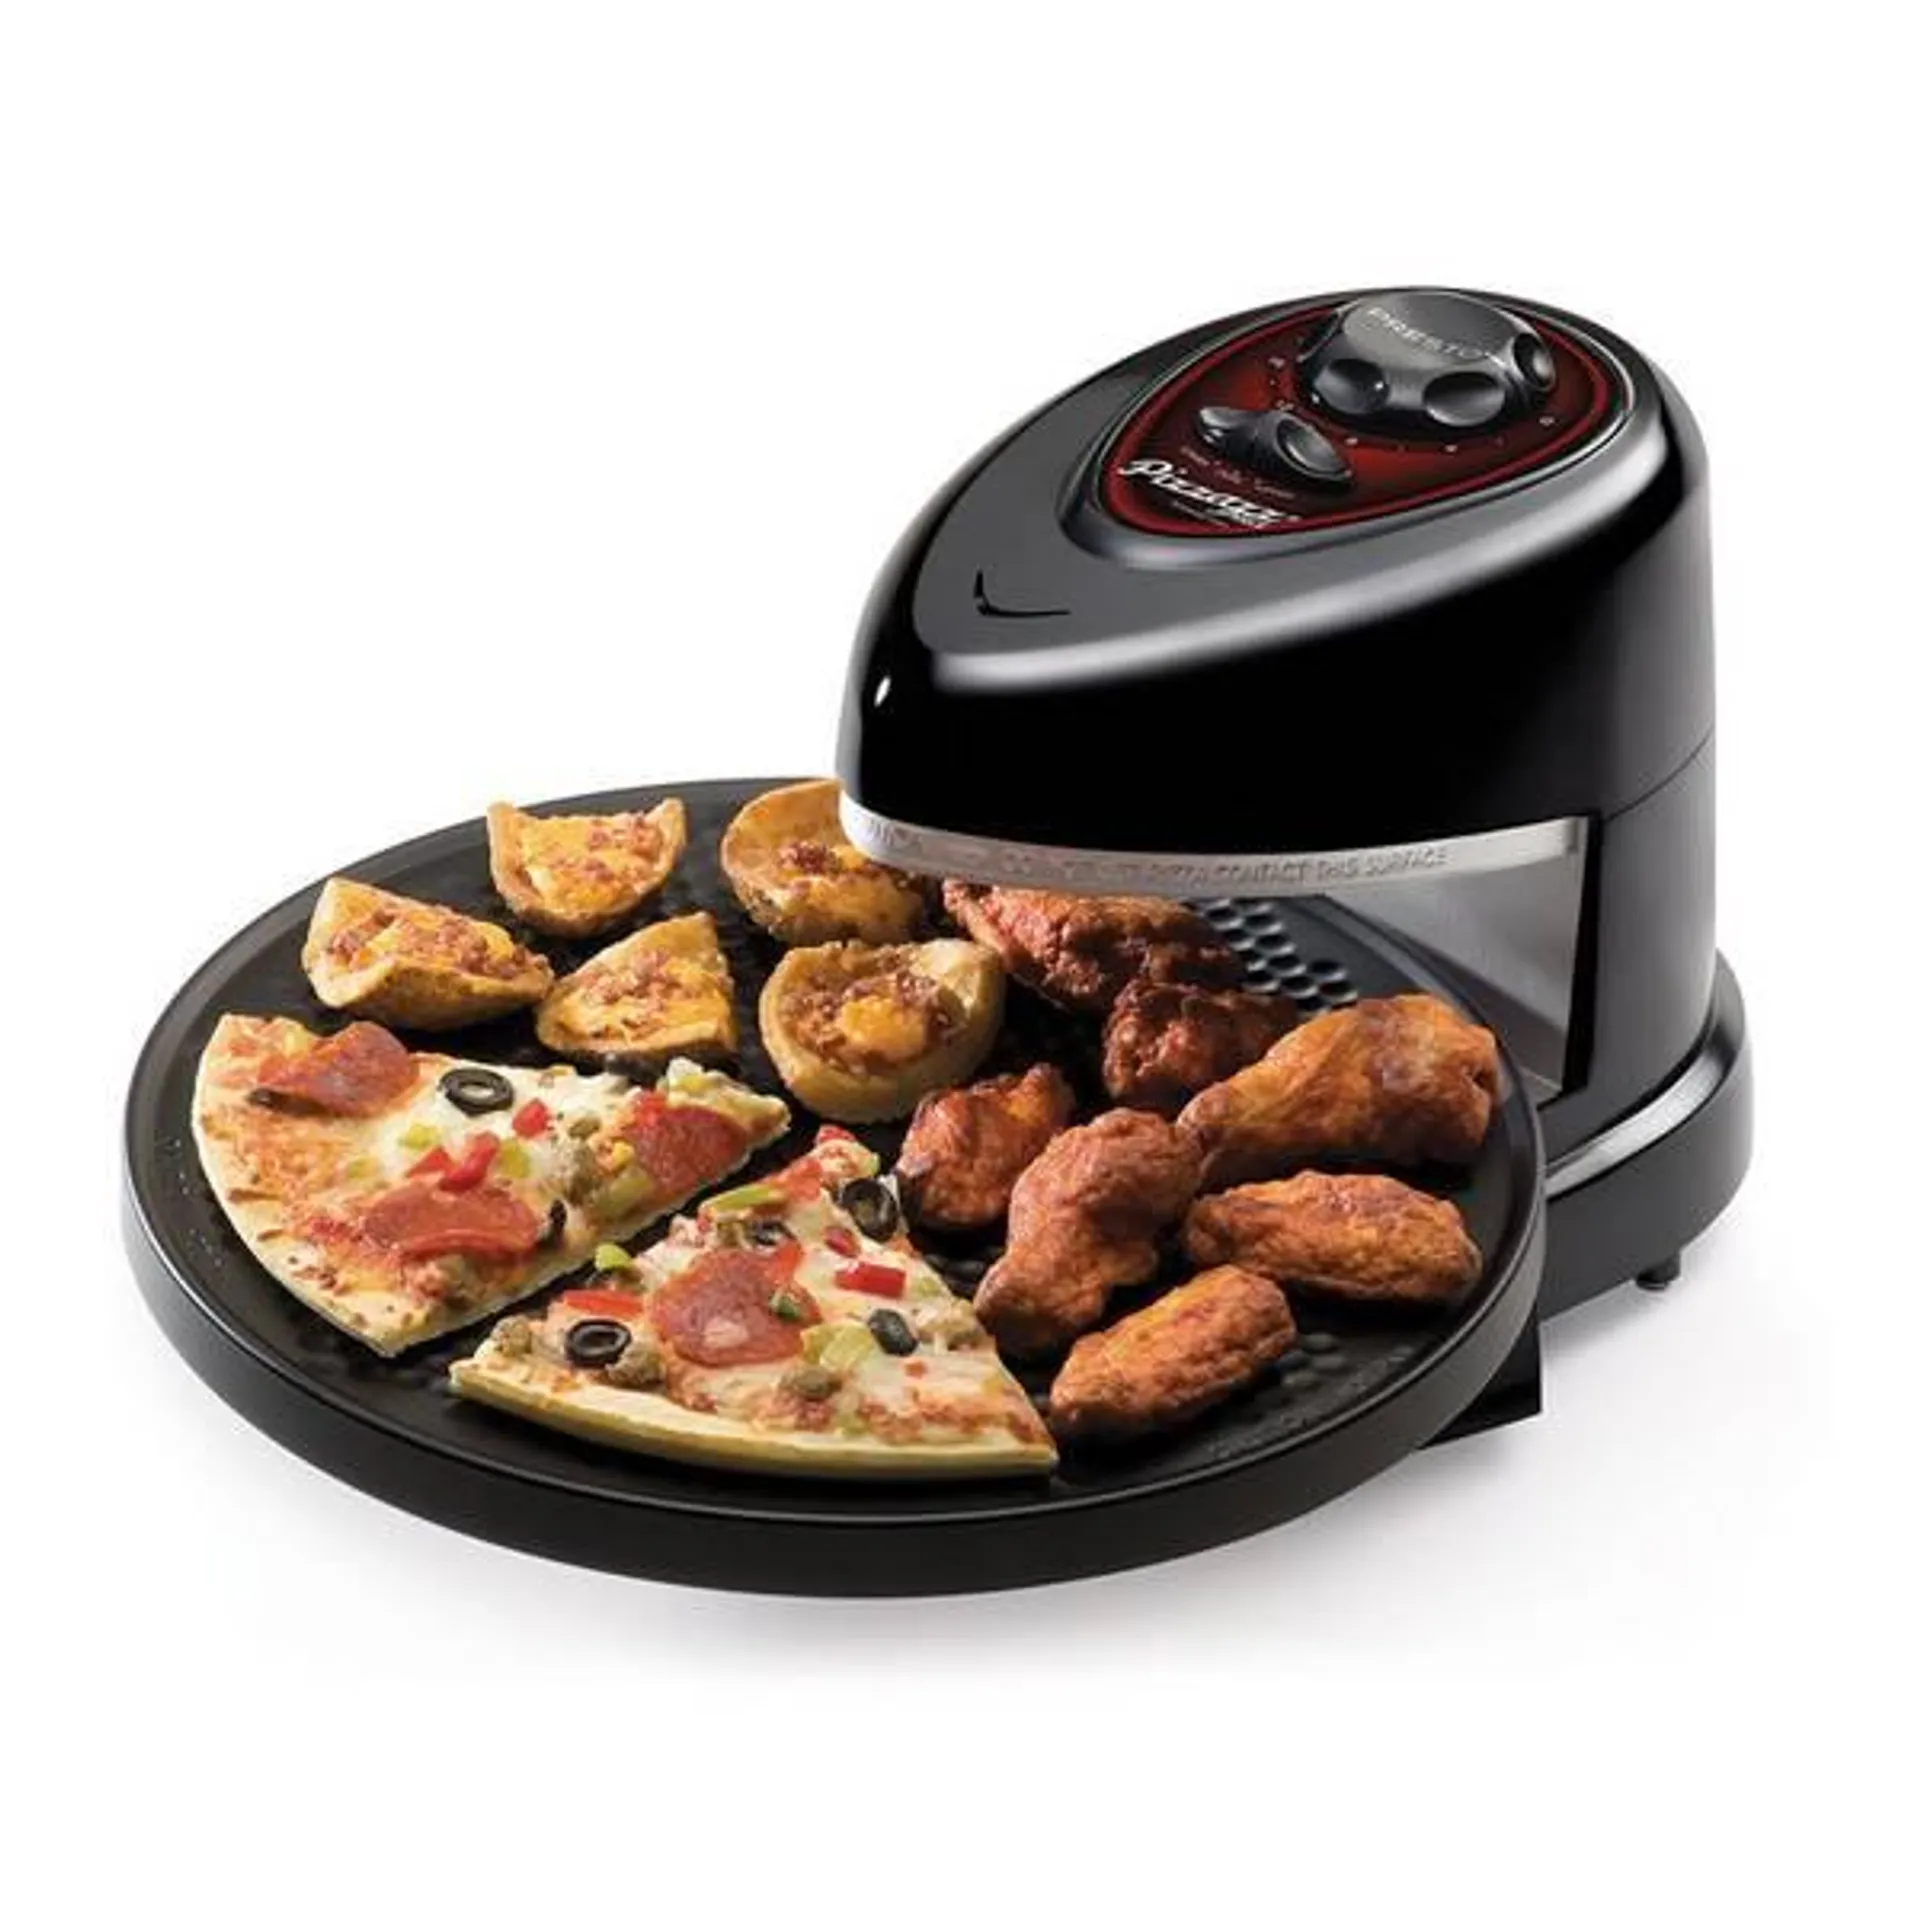 Pizzazz Plus Rotating Oven with Nonstick Baking Pan